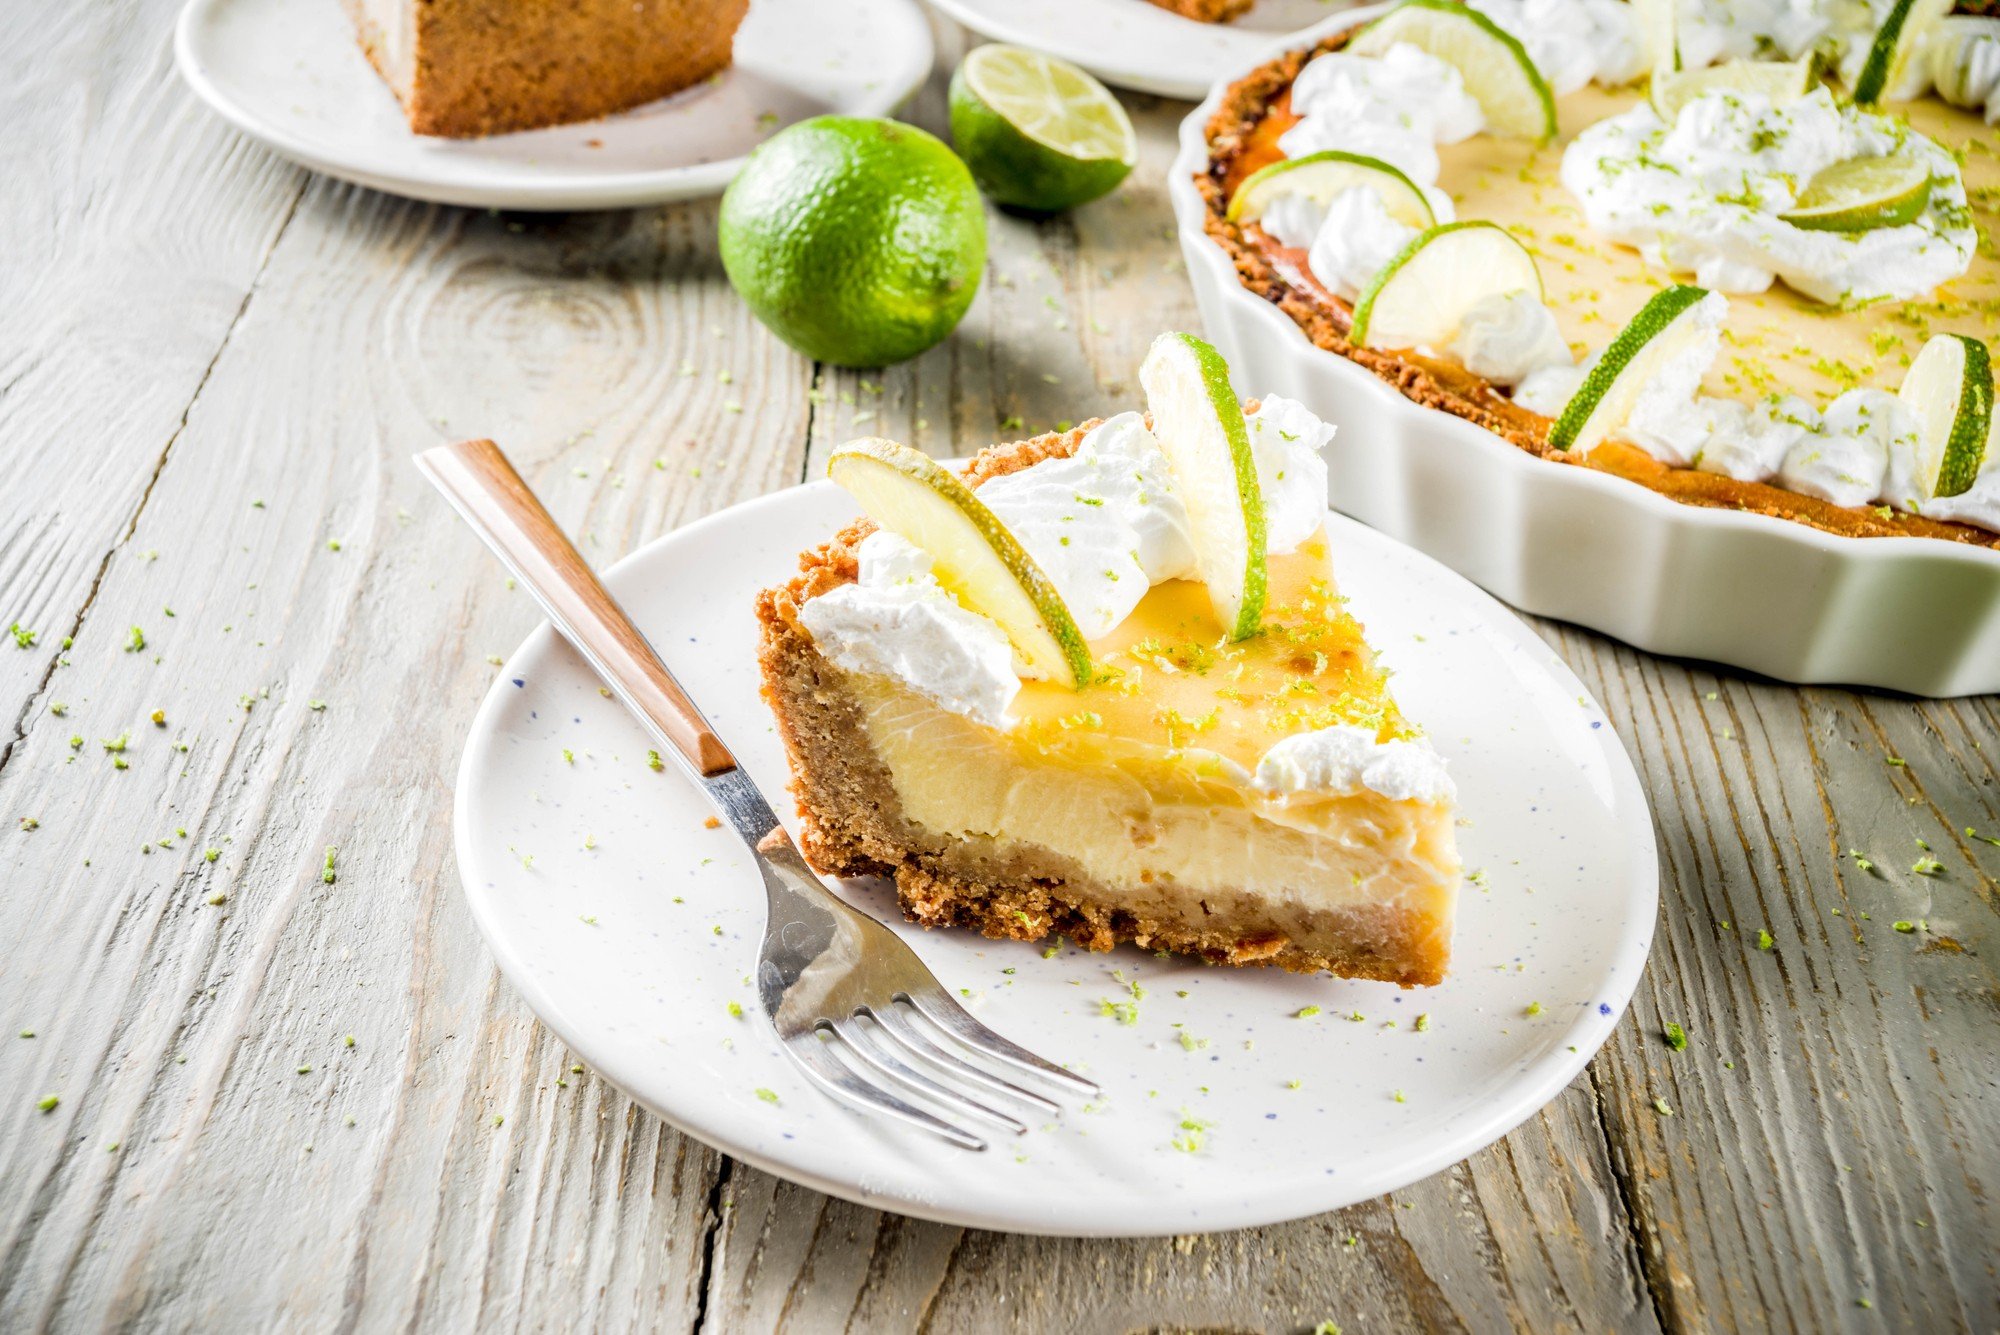 Tasting Key lime pie is a must in the Florida Keys